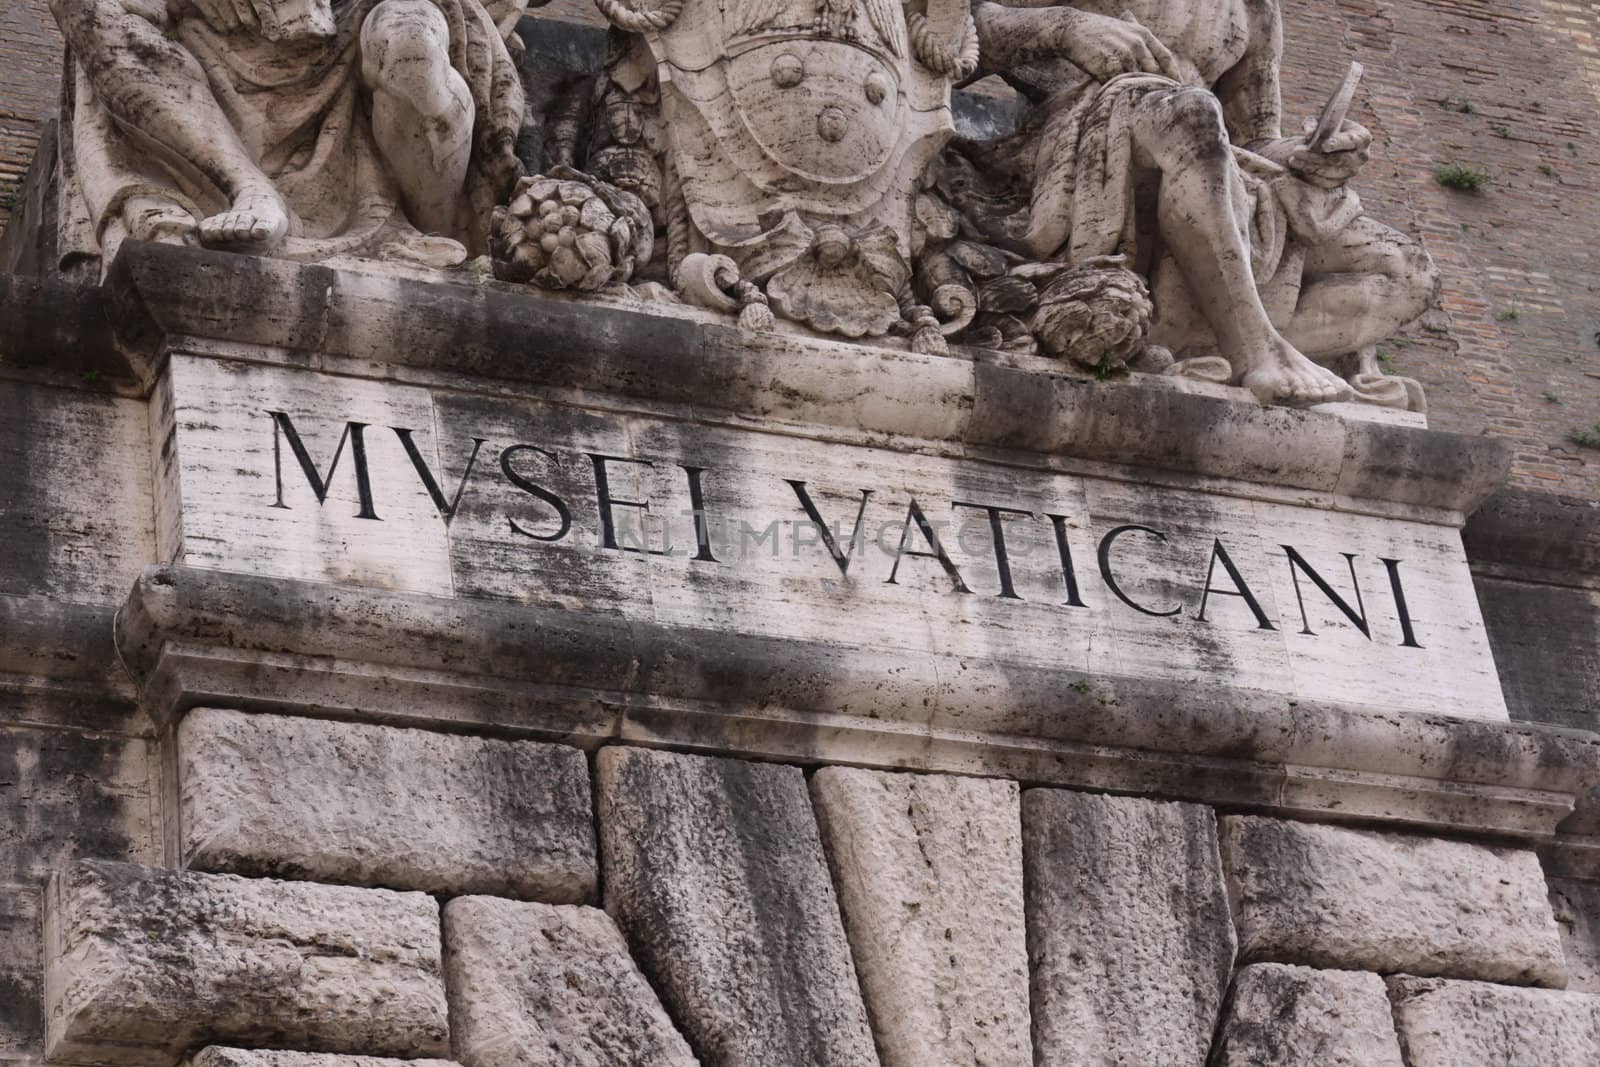 Vatican Museums Lettering by ca2hill